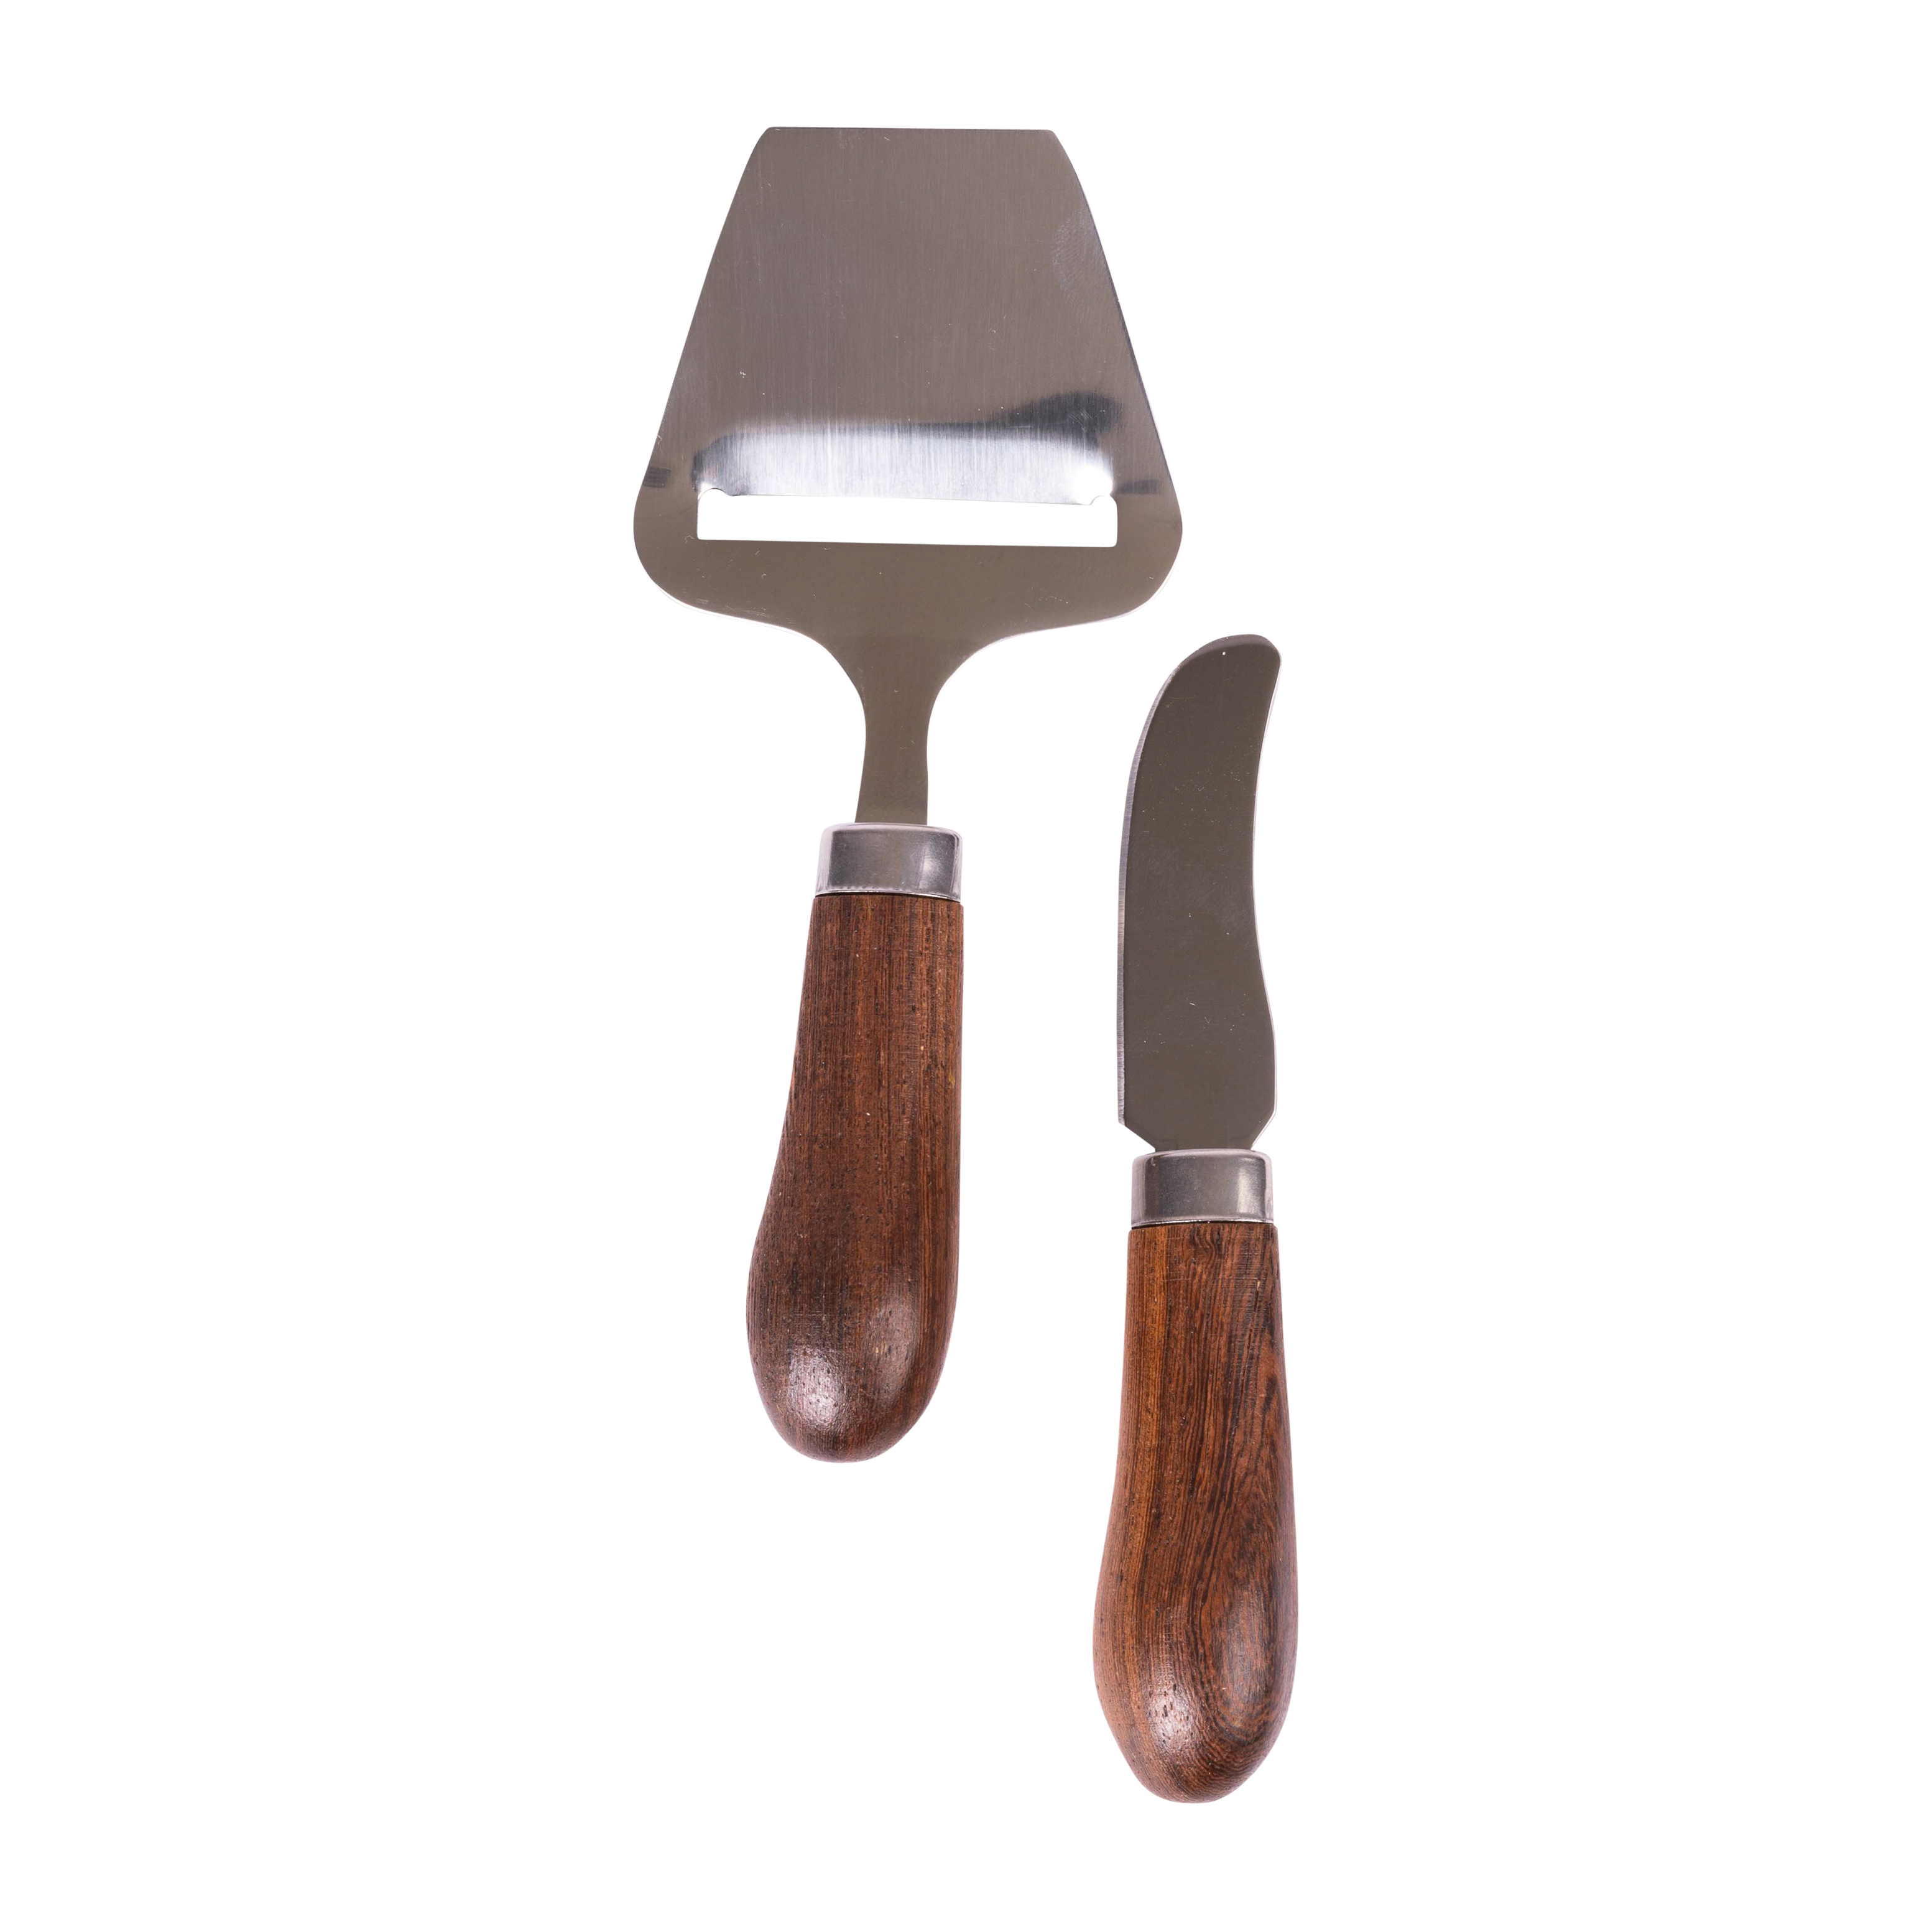 Mini Cheese Slicer – ScanSpecialties